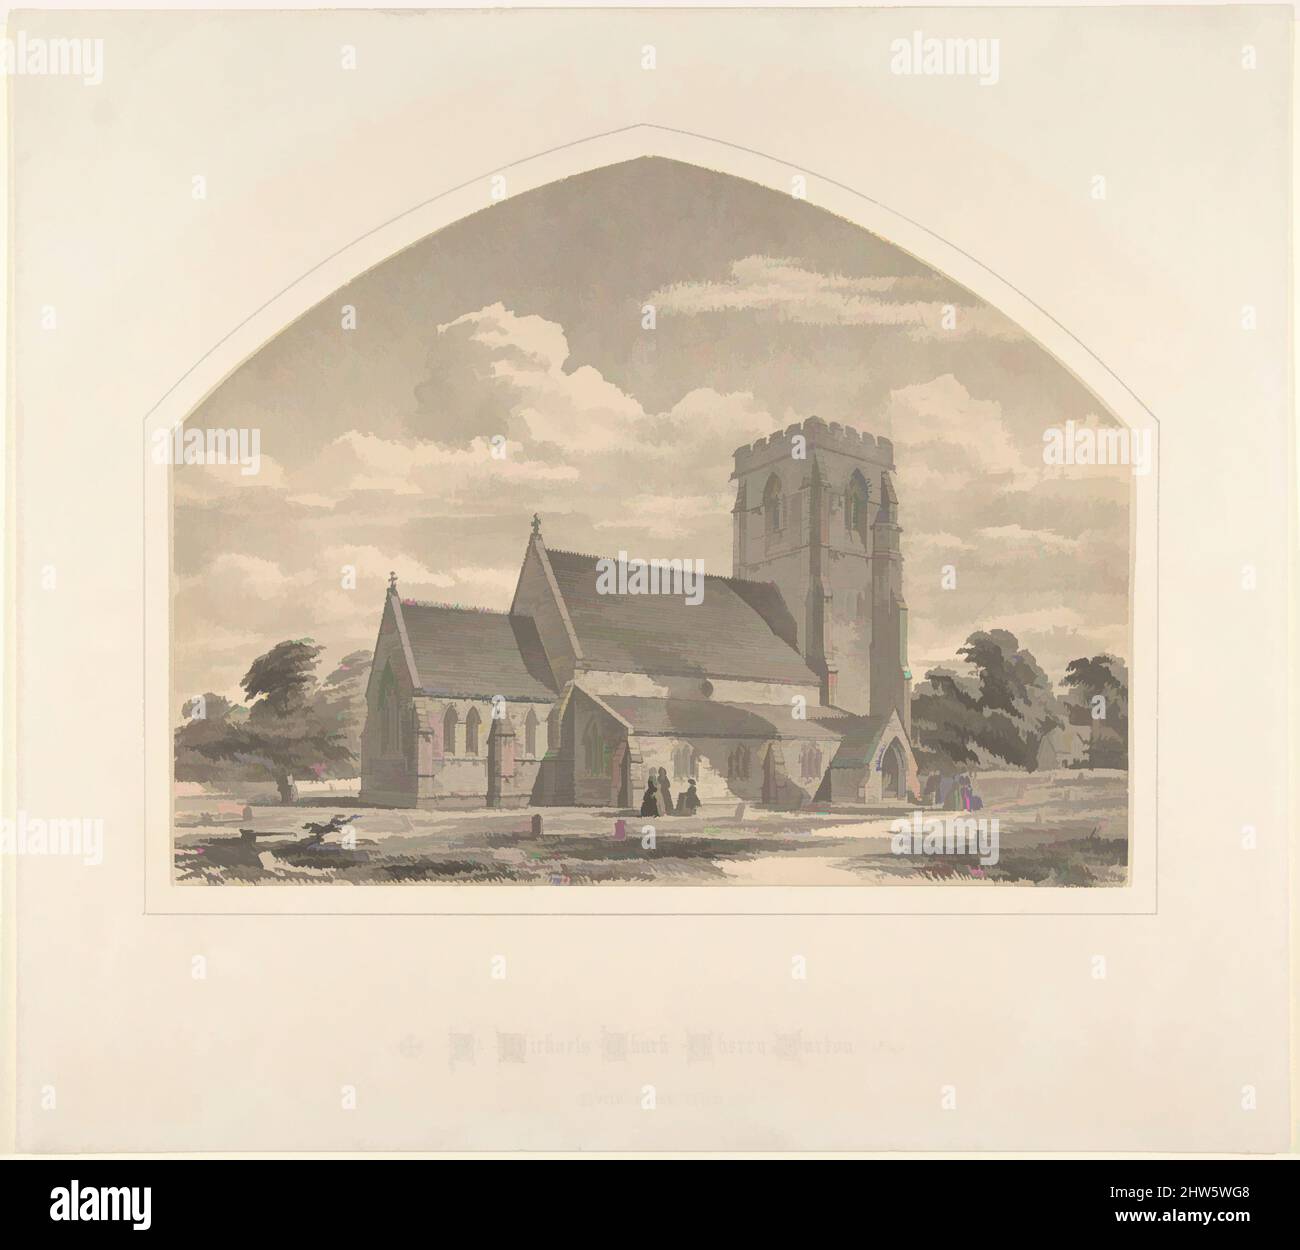 Art inspired by St. Michael's Church, Cherry Burton: North East View, 1845–50, Pen and black ink, watercolor over graphite, sheet (pointed arched top): 8 7/16 x 10 15/16 in. (21.4 x 27.8 cm), Sir Horace Jones (British, London 1819–1887 London, Classic works modernized by Artotop with a splash of modernity. Shapes, color and value, eye-catching visual impact on art. Emotions through freedom of artworks in a contemporary way. A timeless message pursuing a wildly creative new direction. Artists turning to the digital medium and creating the Artotop NFT Stock Photo